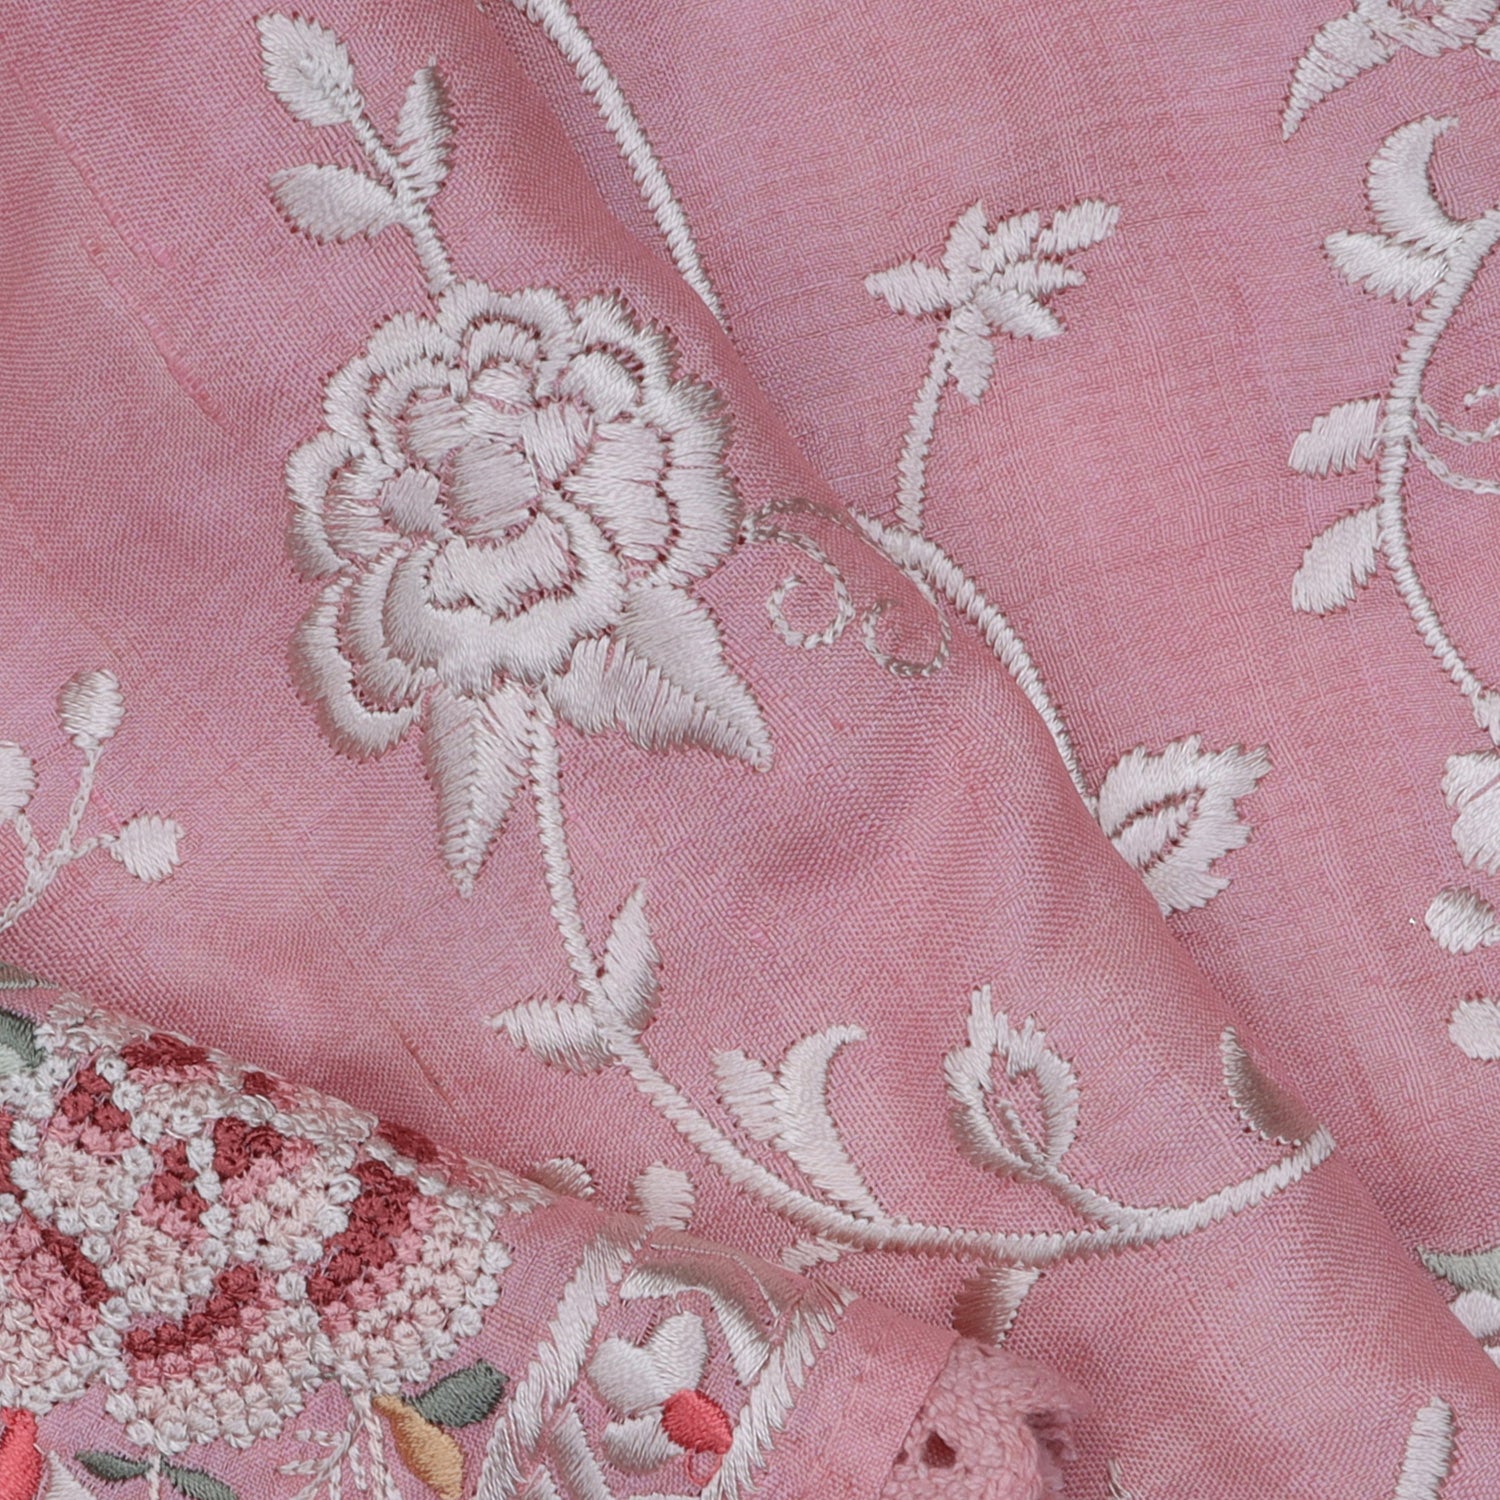 Pastel Pink Tussar Saree With Floral Embroidered Pattern - Singhania's